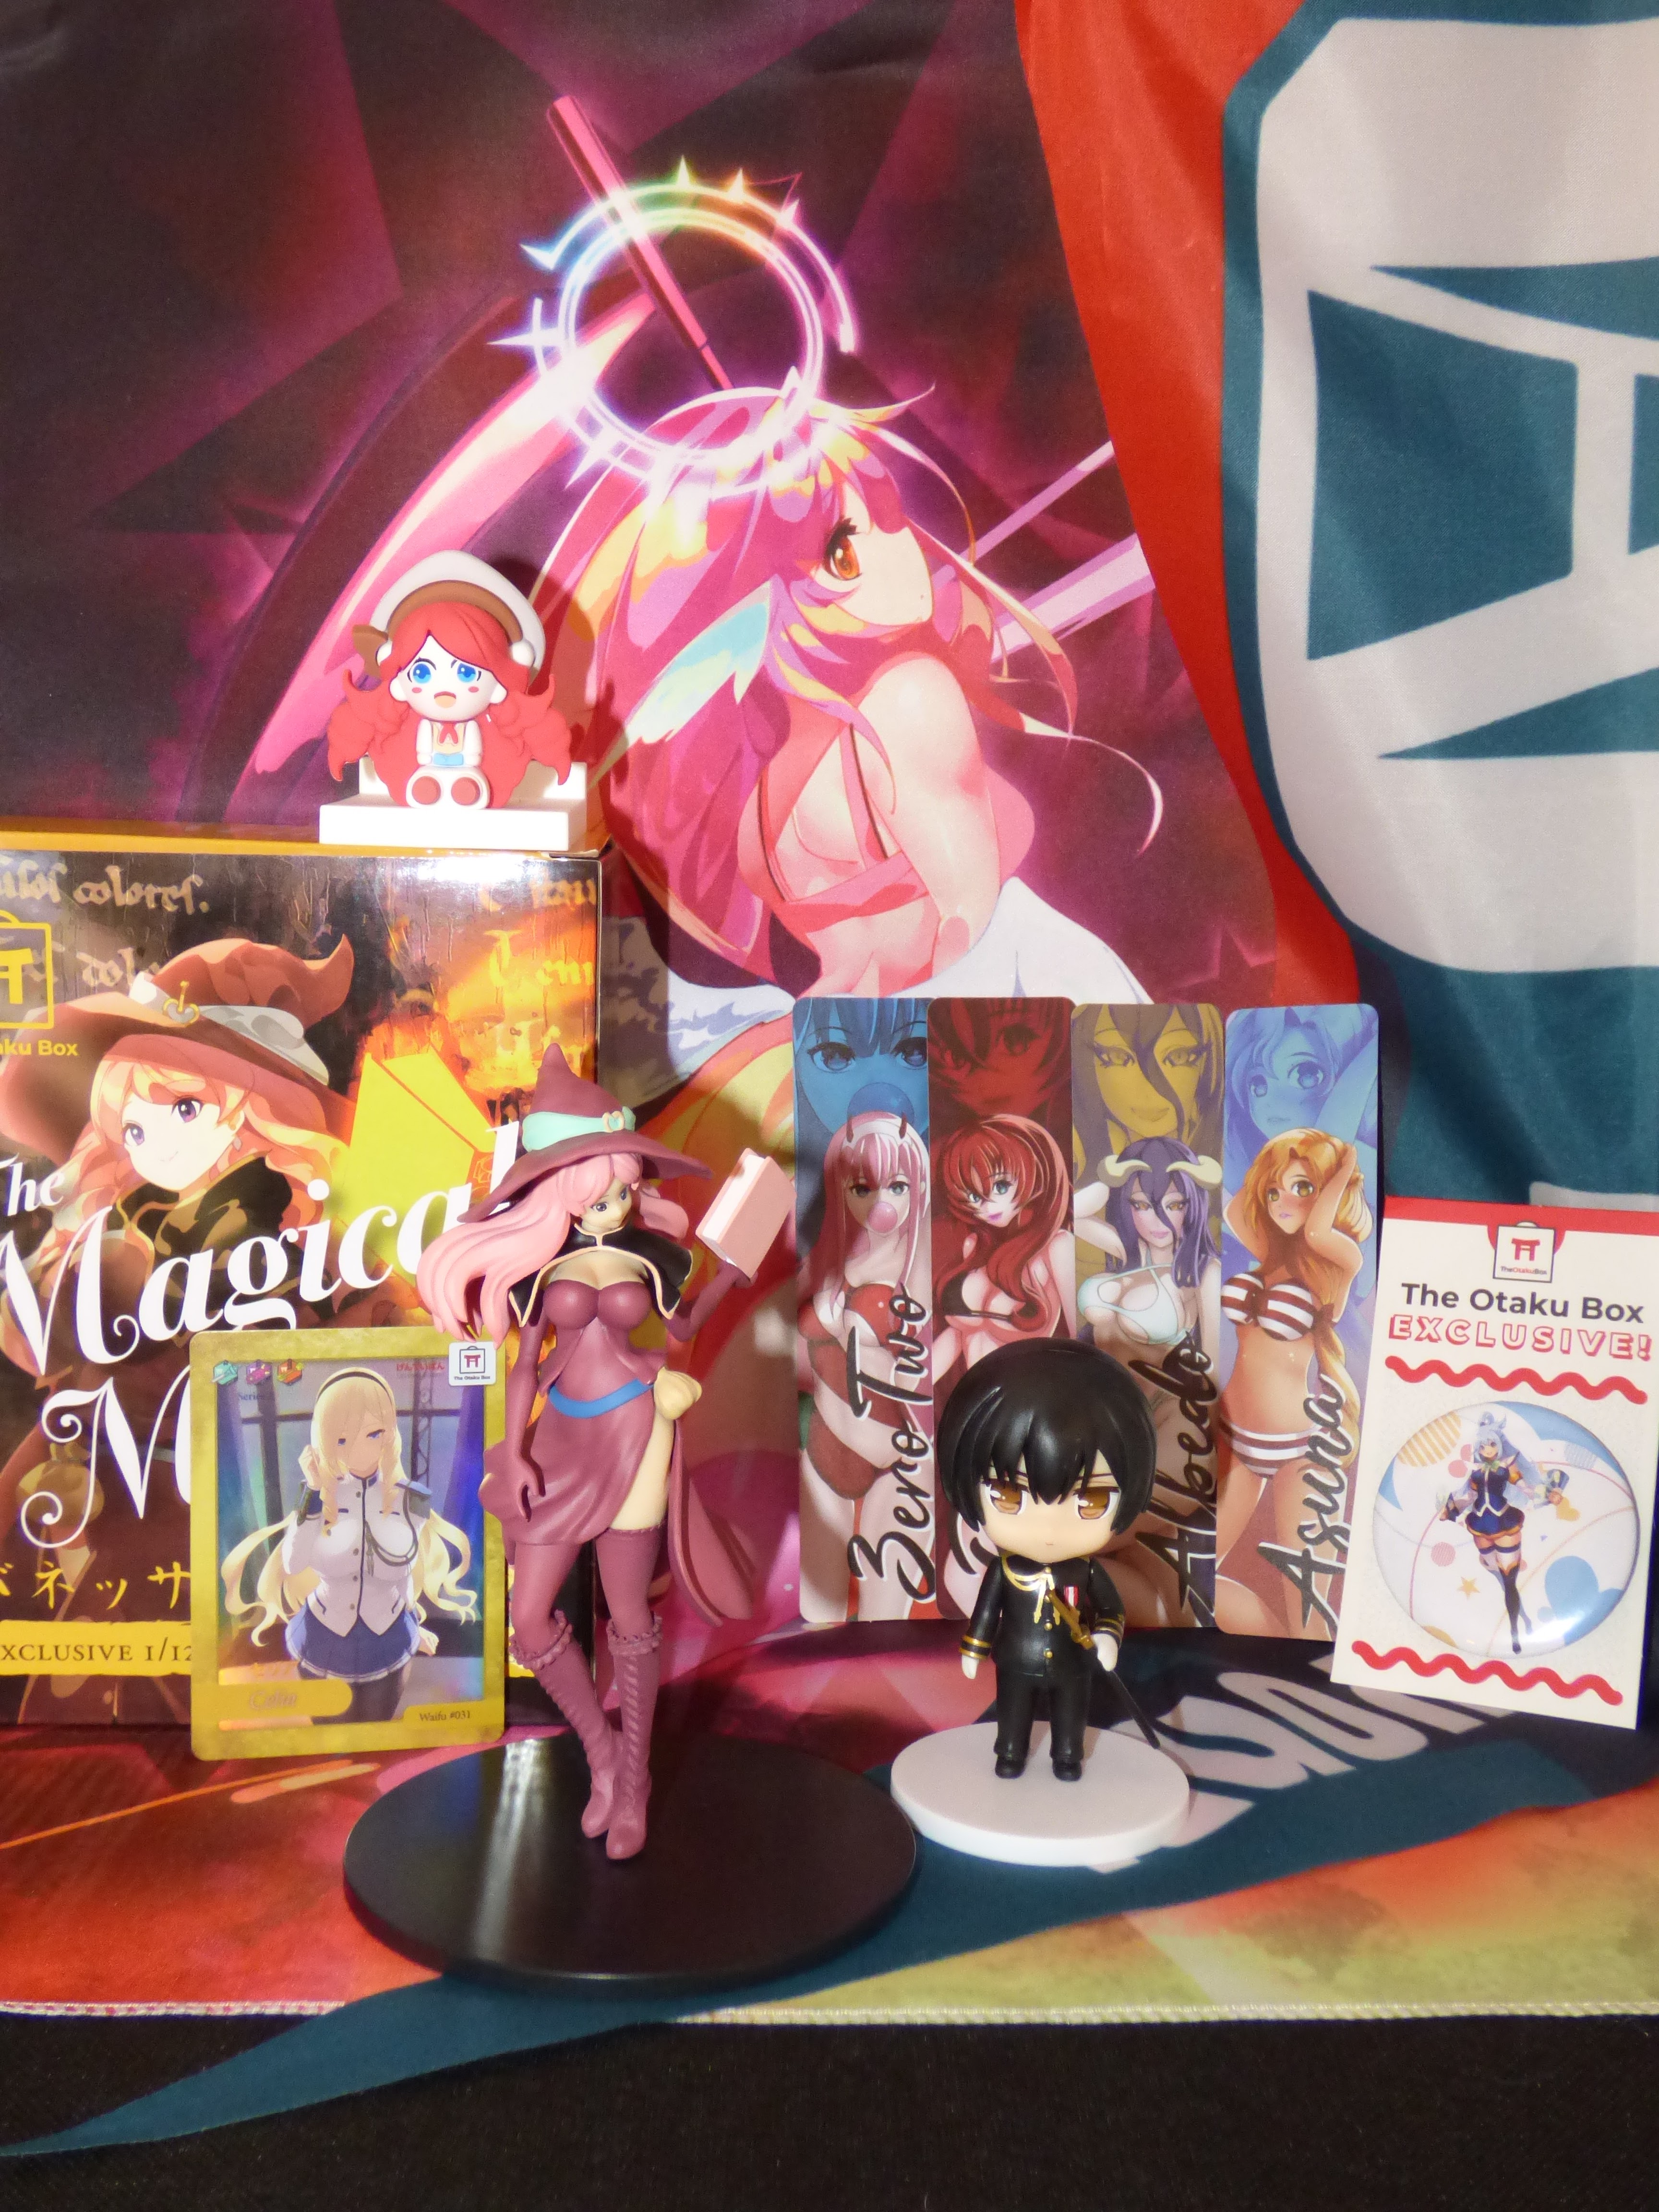 How To Go To Another World: Anime That Will Transport You! – The Otaku Box